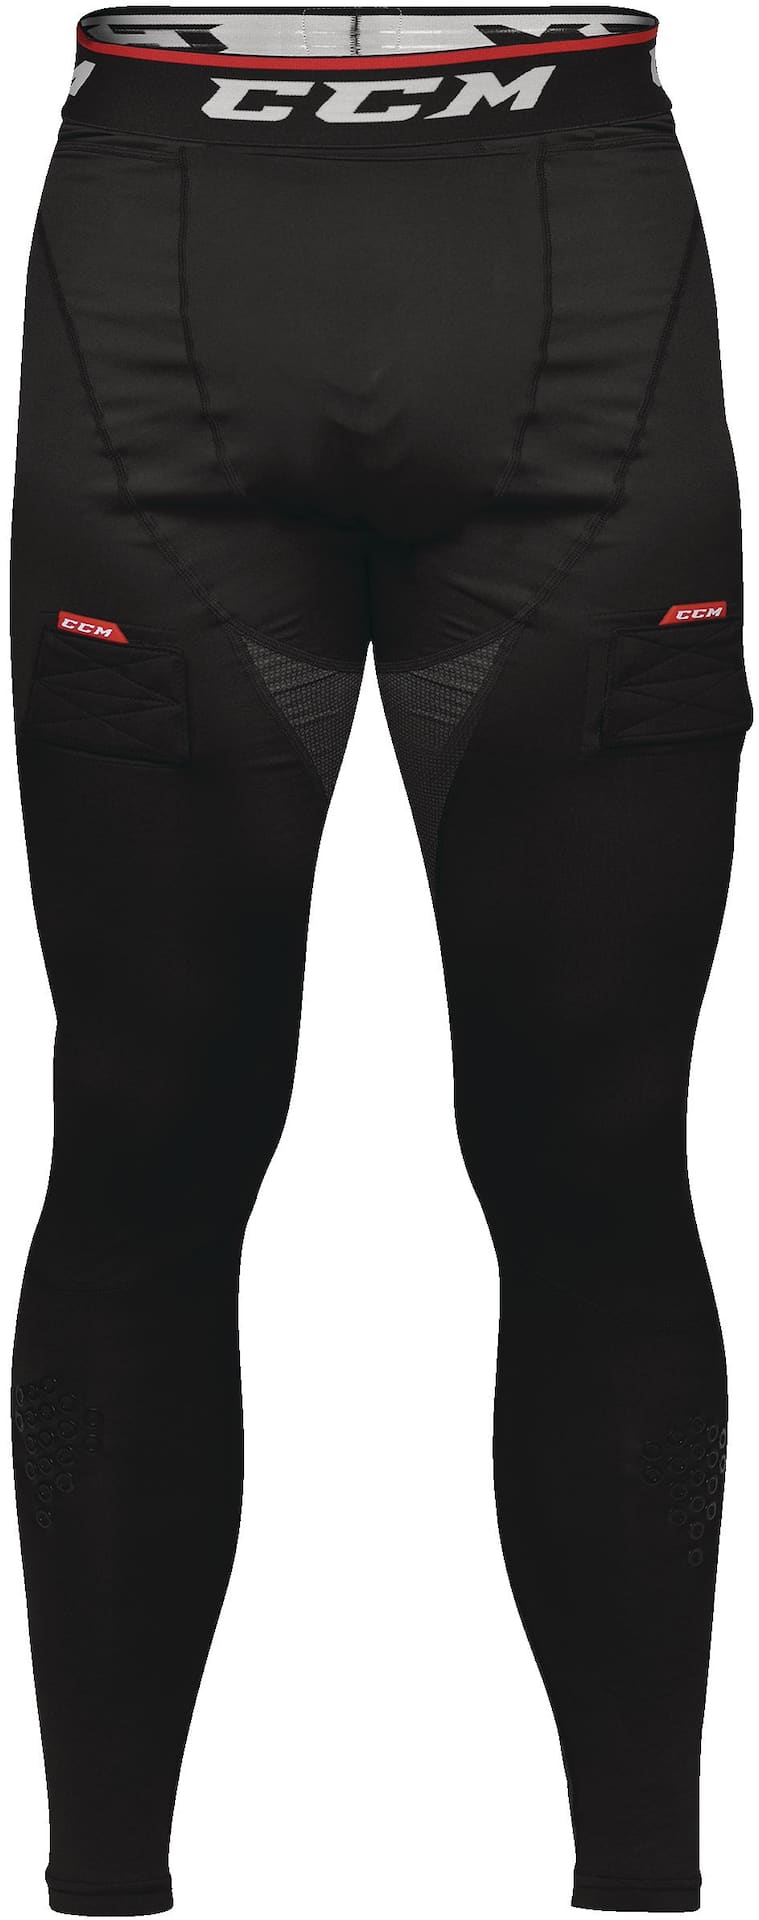  TUOY Men's Padded Compression Pants Quick Drying